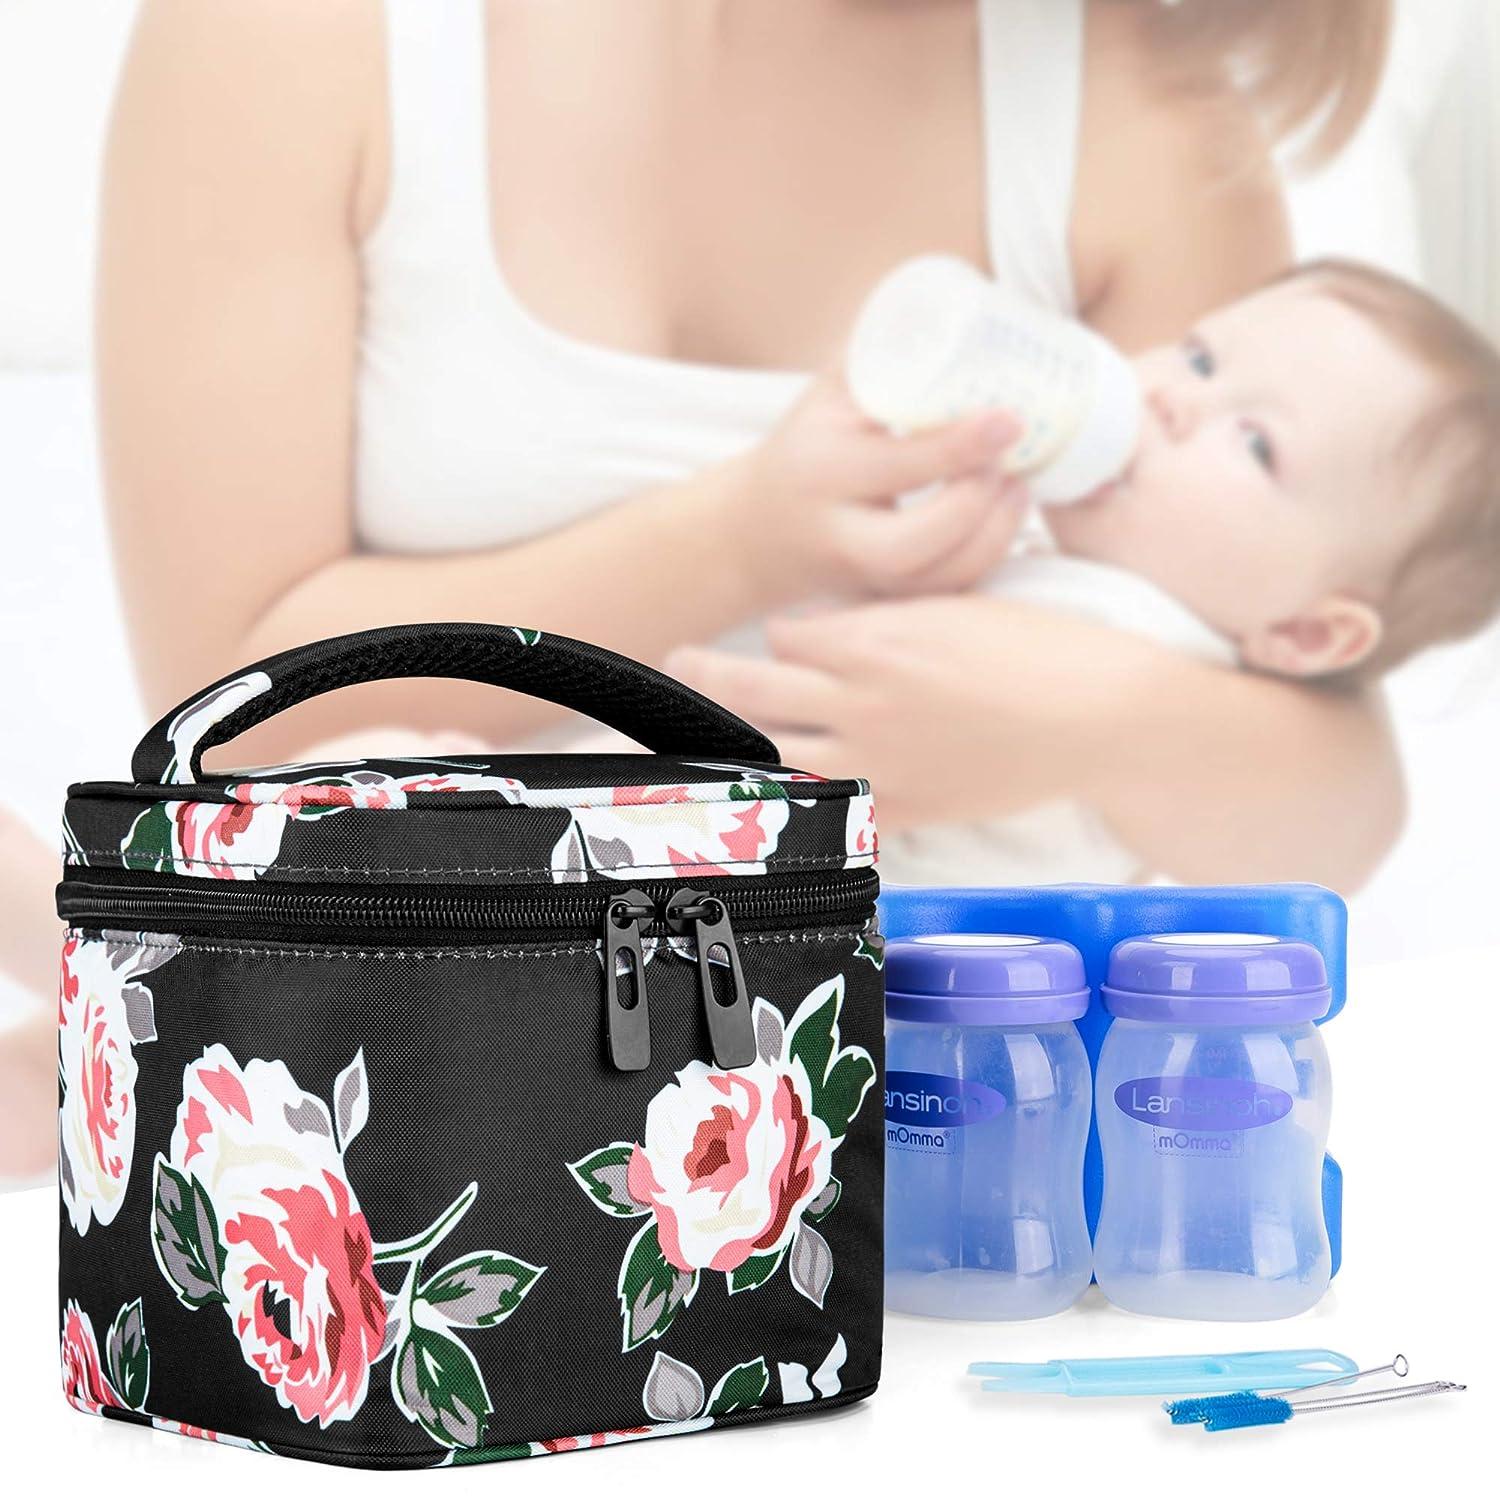 CURMIO Breastmilk Cooler Bag for Four Bottles up to 5 Oz Insulated Baby  Bottle Bag Perfect for Daycare Travel Nursing Mom Bag Only Black Flowers